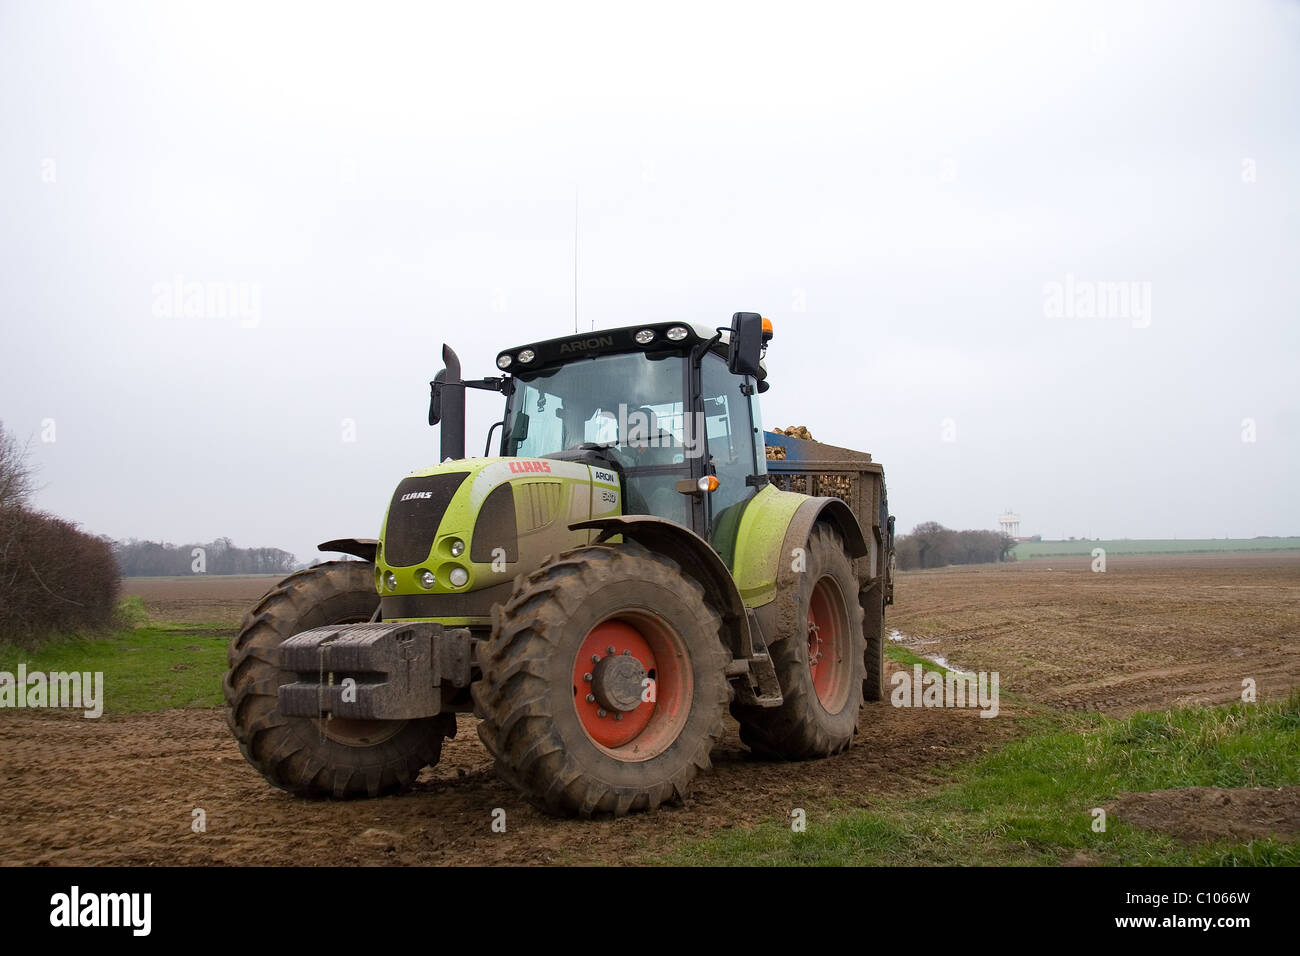 Claas Arion 640 tracteurs et remorques karting betteraves North Norfolk. Banque D'Images